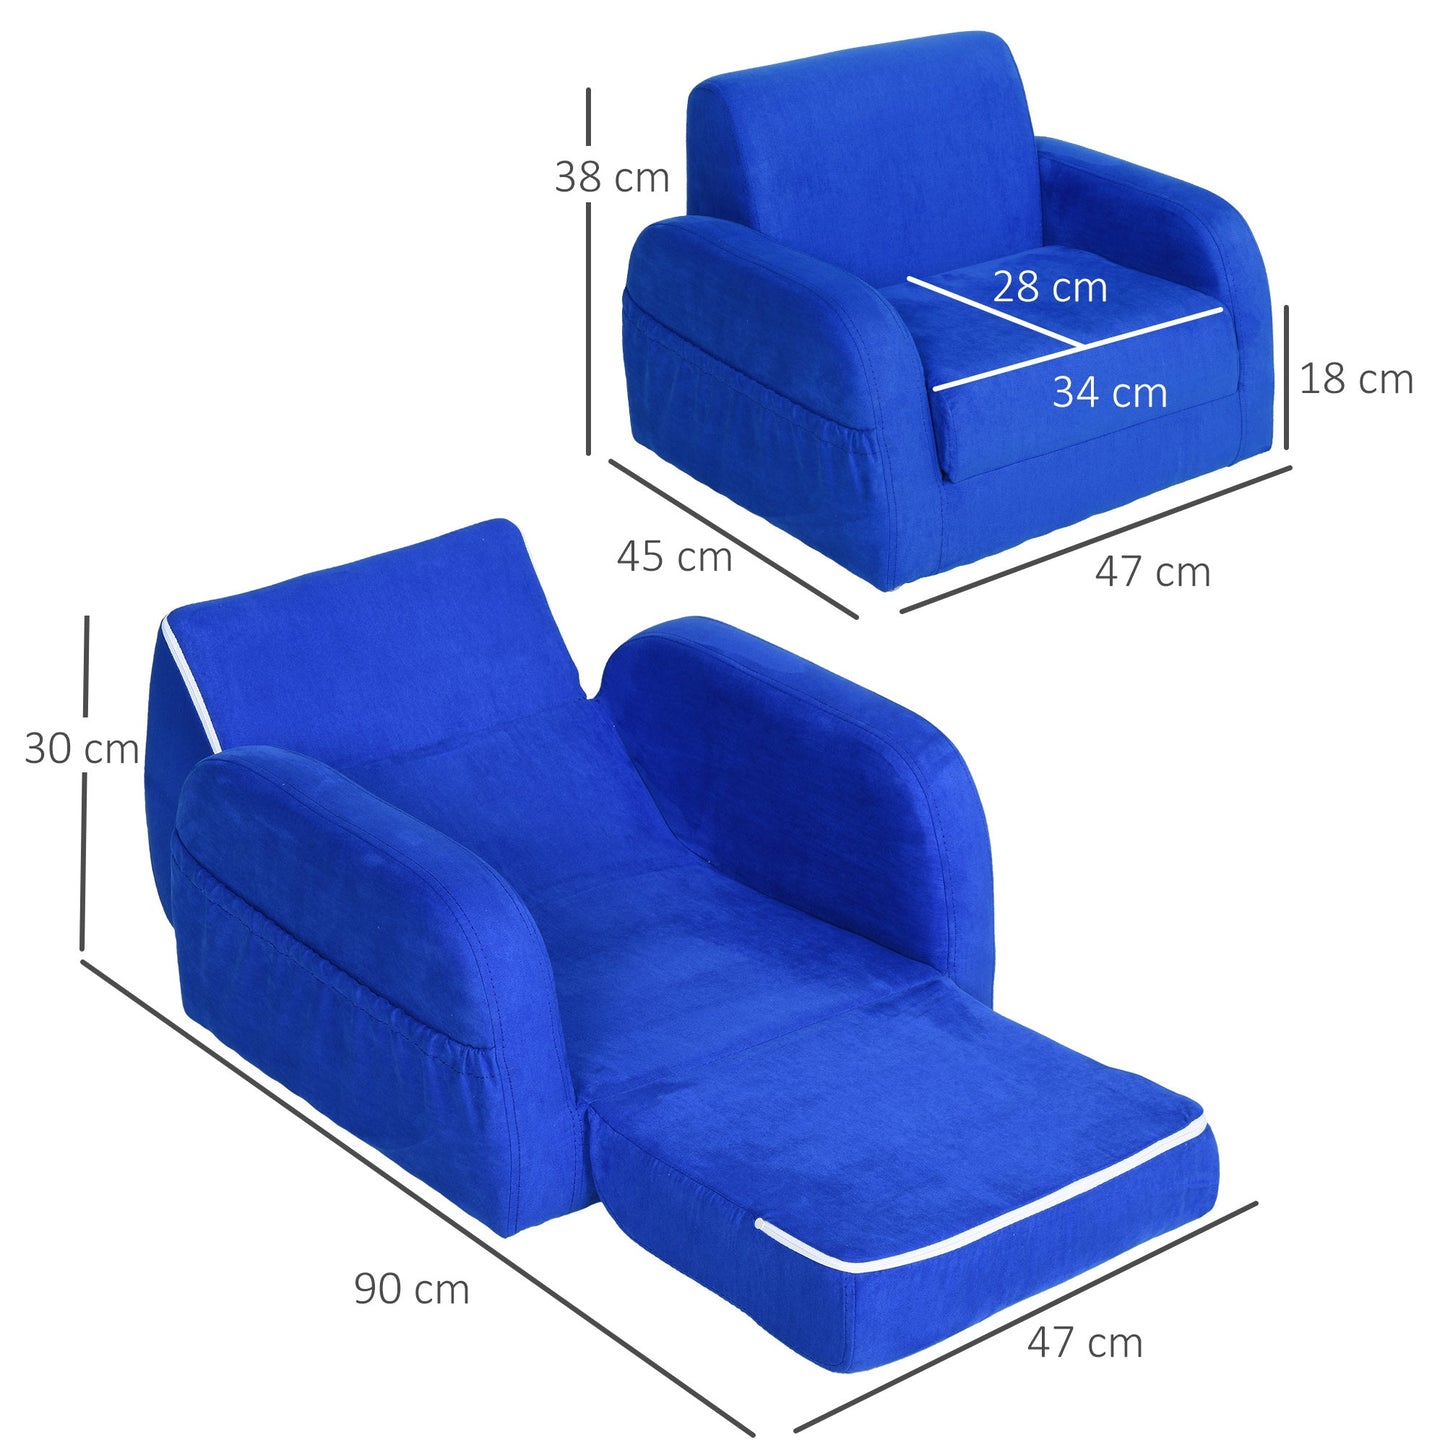 HOMCOM 2 In 1 Kids Children Sofa Chair Bed Folding Couch Soft Flannel Foam Toddler Furniture for 3-4 years old Playroom Bedroom Living Room Blue